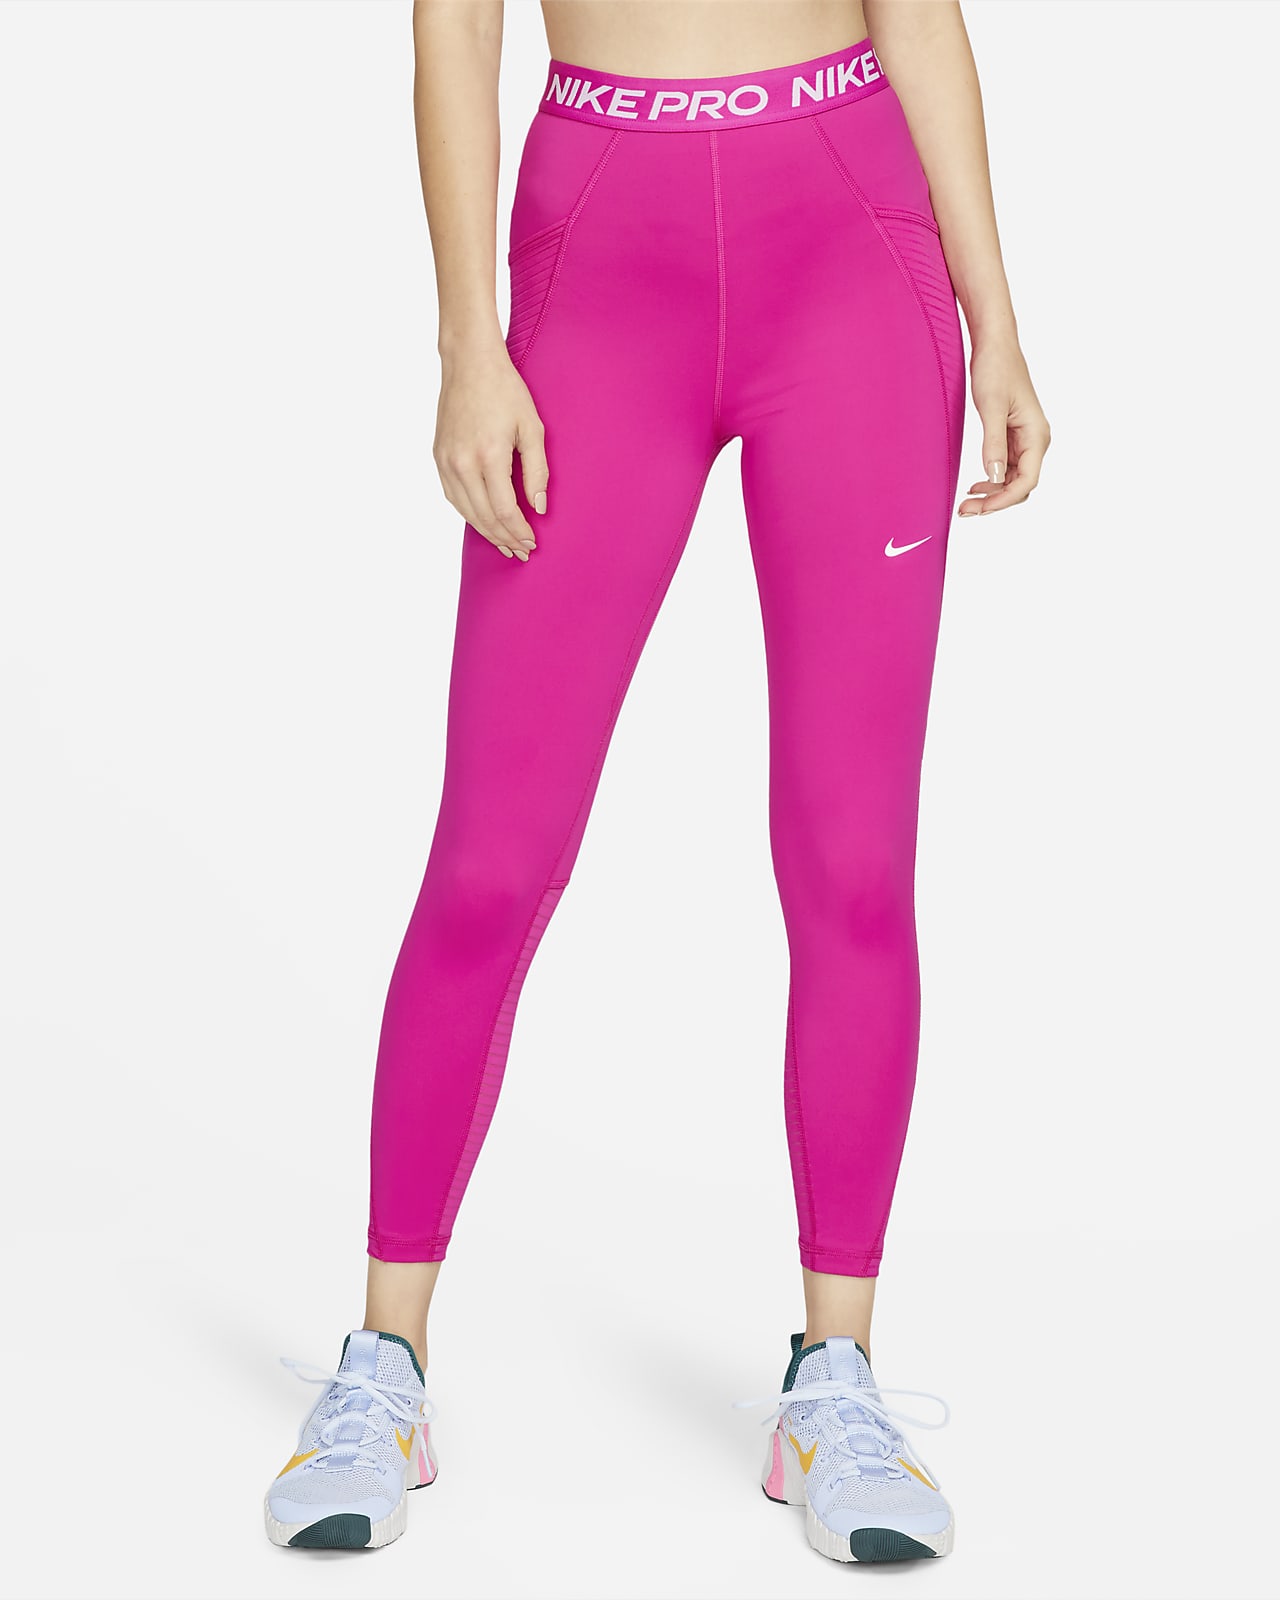 Nike Pro Women's High-Waisted Leggings with Pockets.